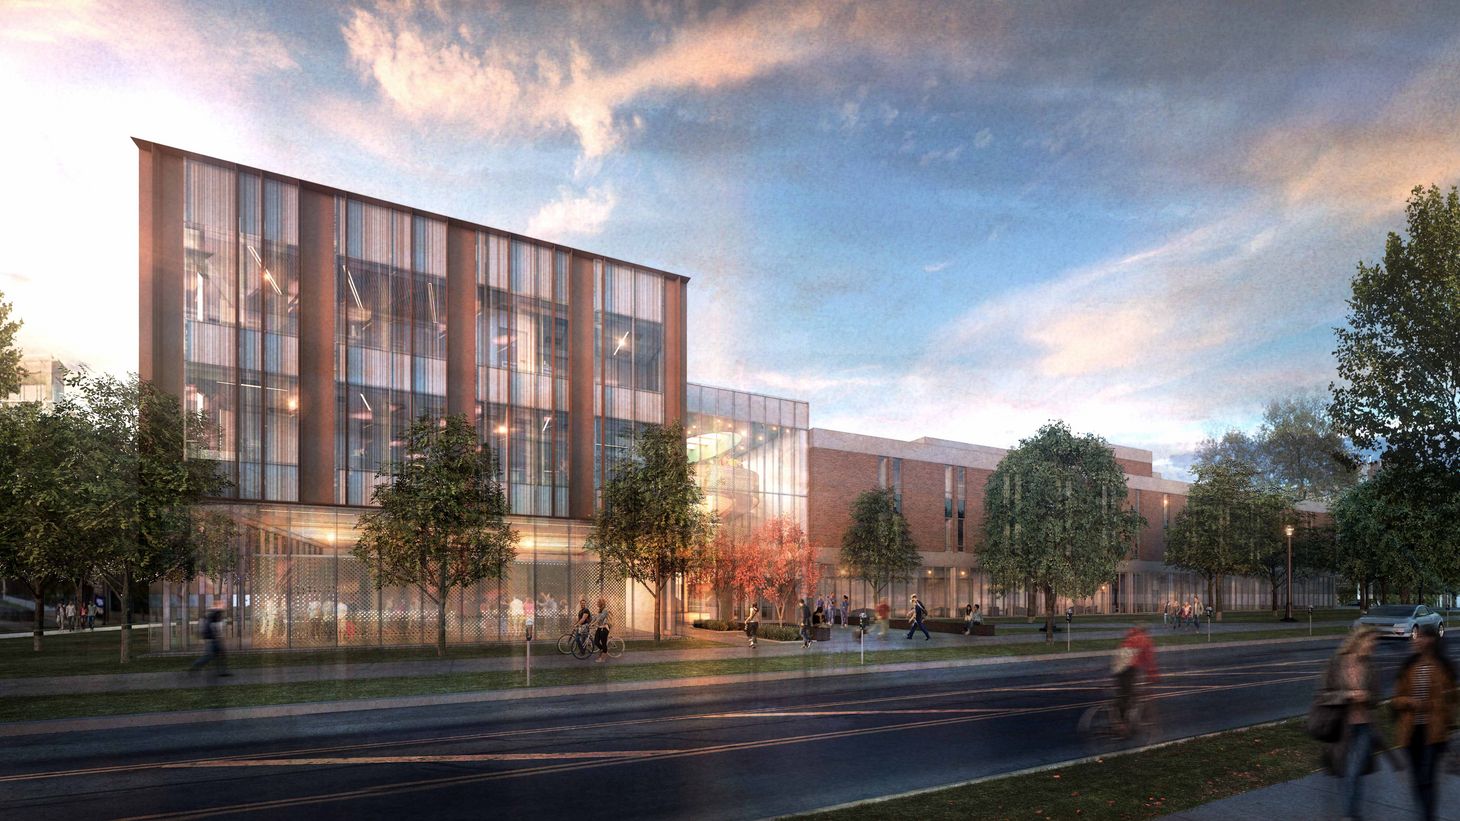 rendering of Newton Hall addition